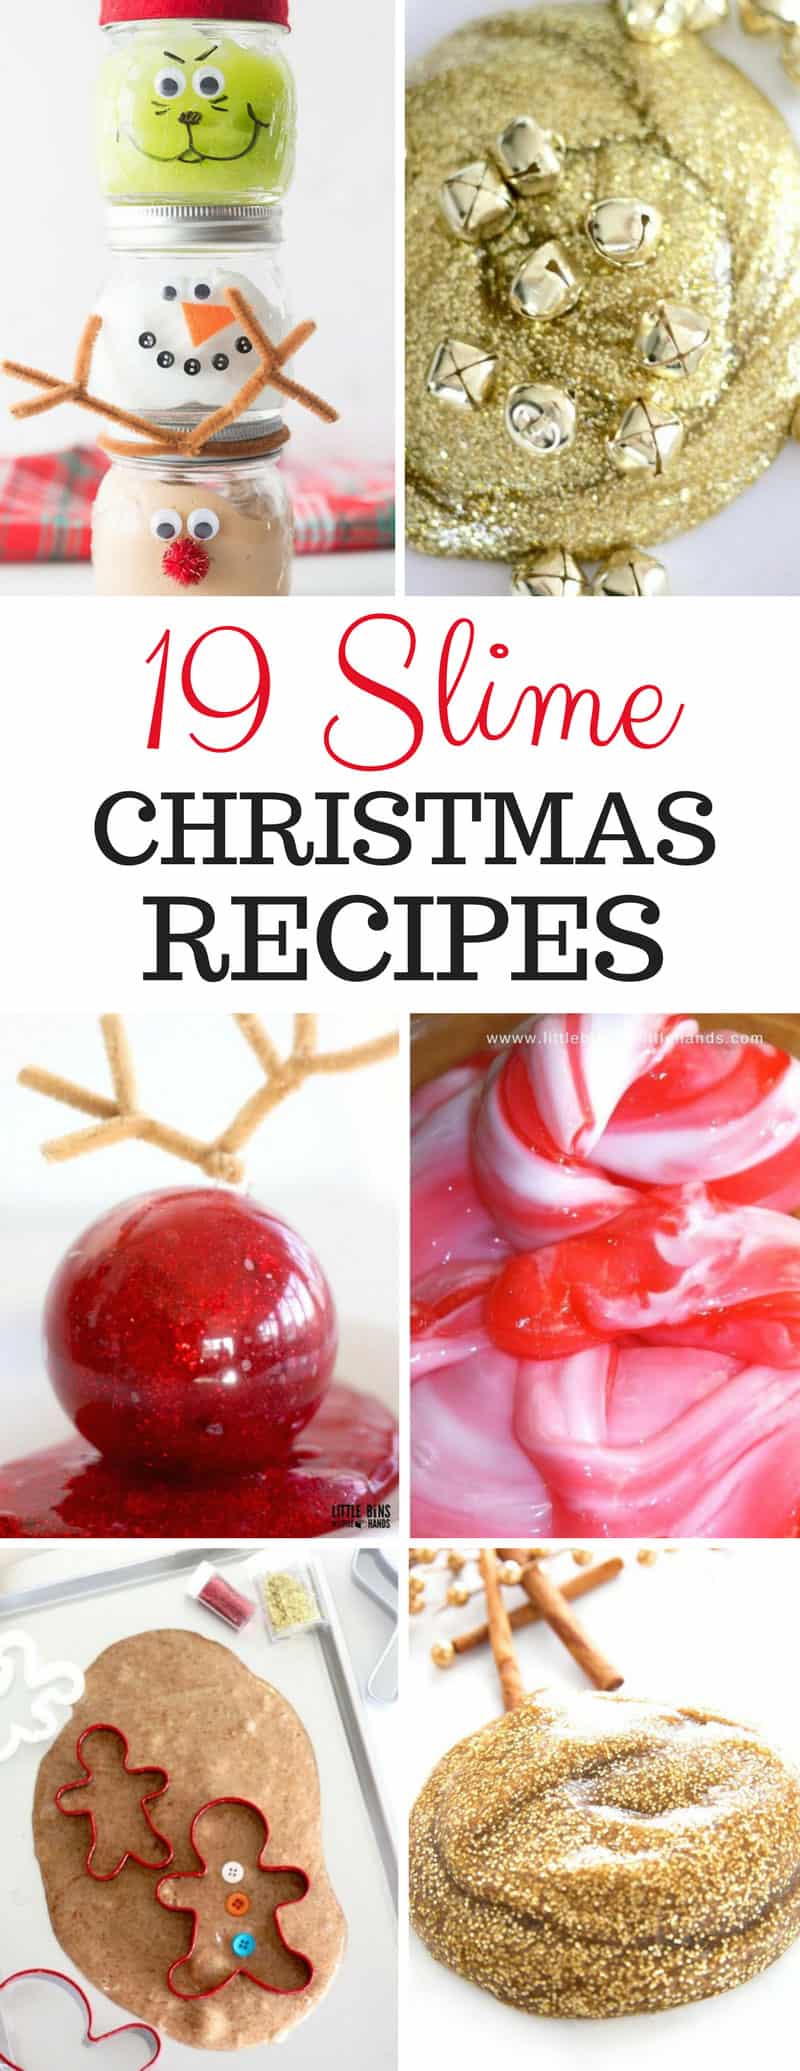 Christmas Slime Recipes - 2020 has been the year of SLIME so I couldn't resist pulling together a collection of the best Christmas slime recipes! I found everything from Santa Suit Slime and Christmas Tree Slime to Snow Slime, oh and my favourite the Christmas Explosion Slime! 